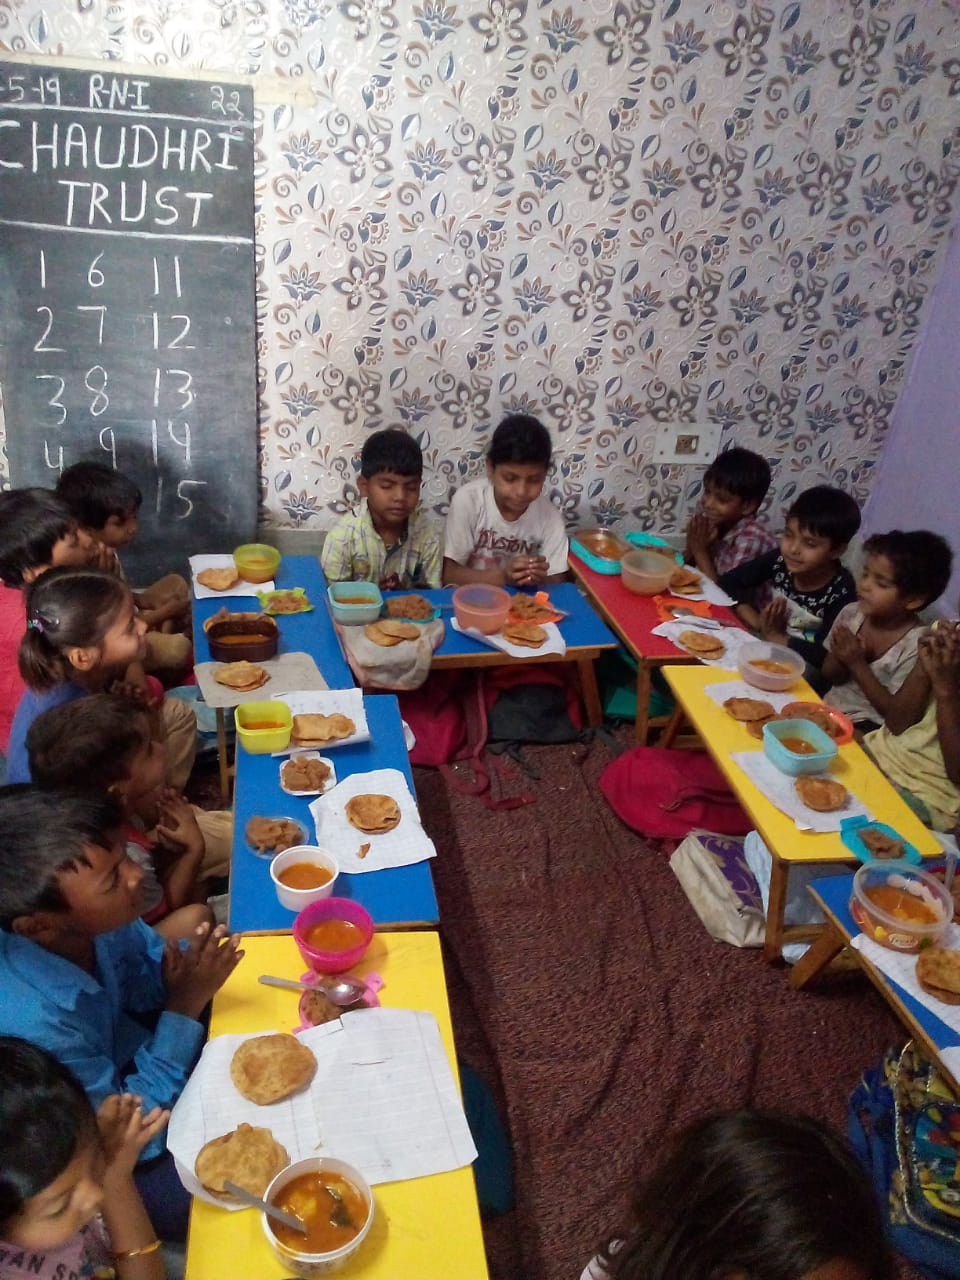 The children say a prayer of thanks before their meal